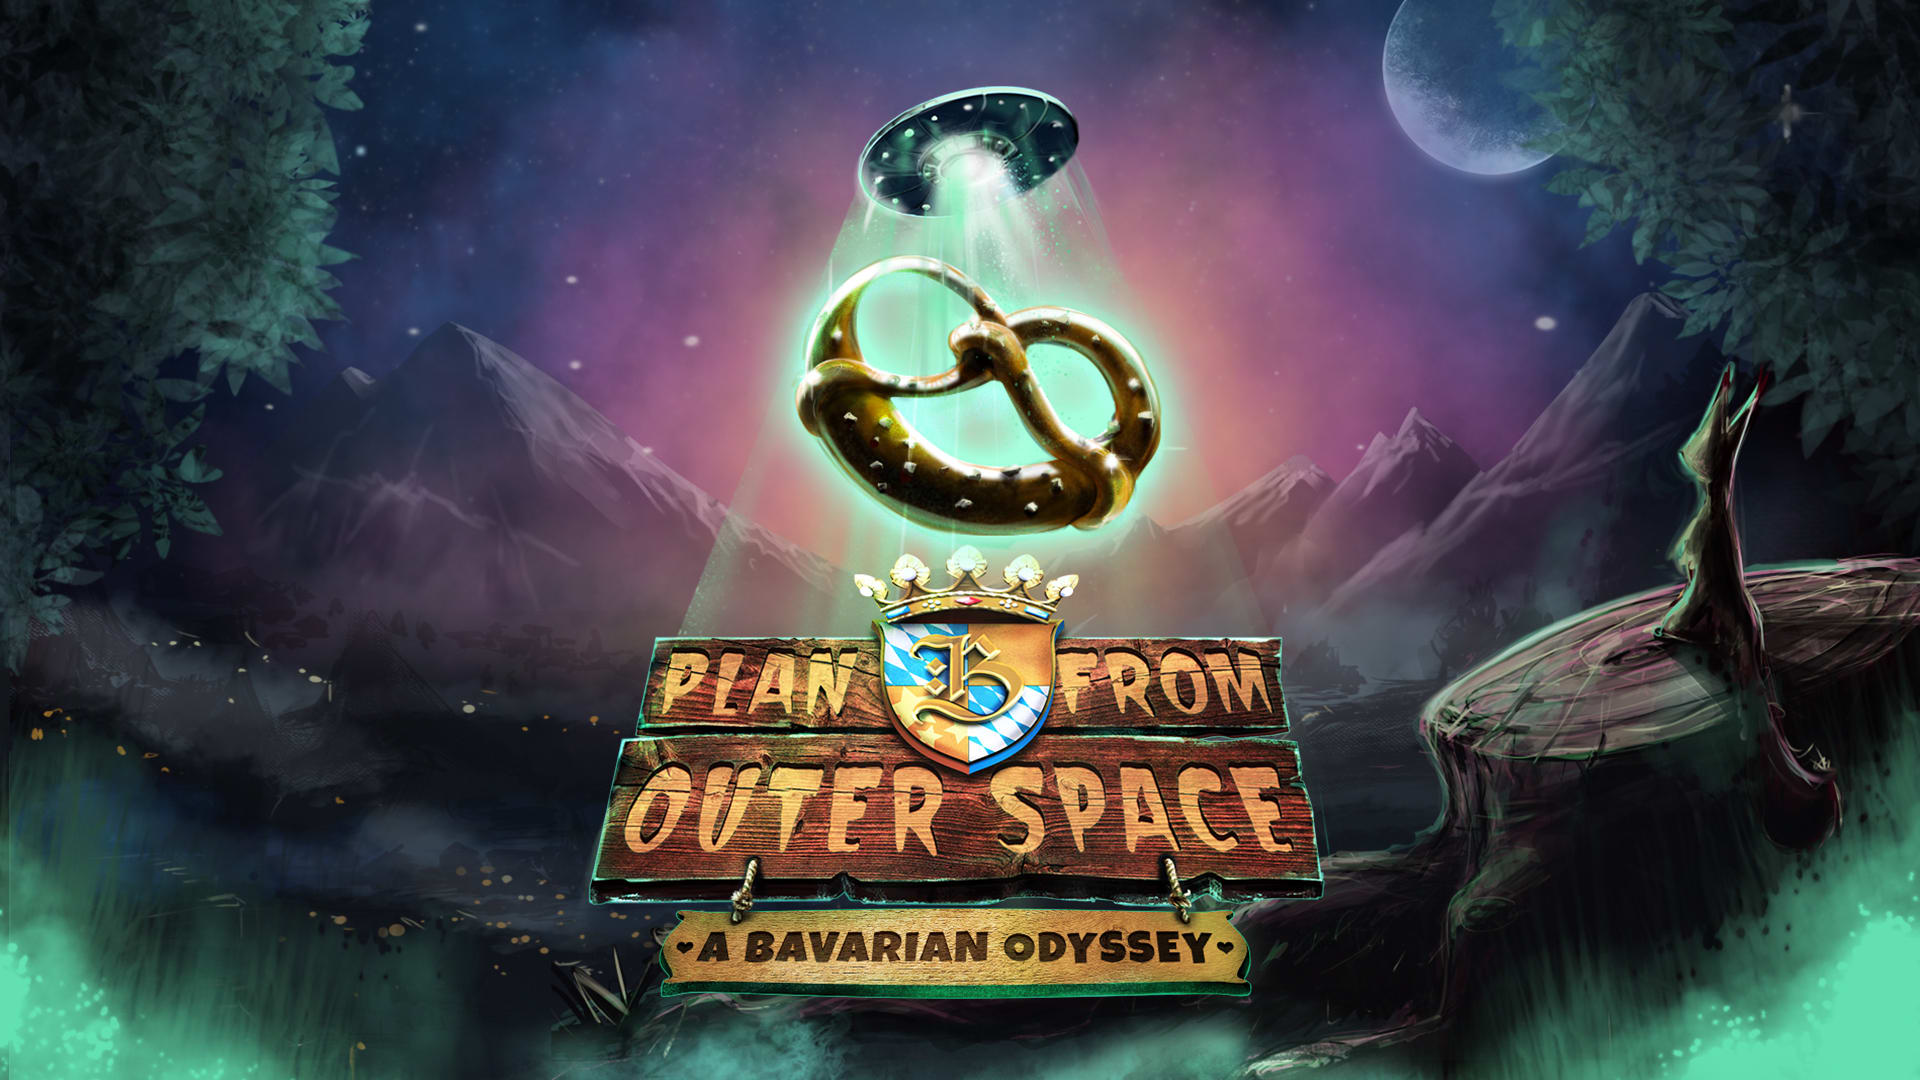 Plan B from Outer Space: A Bavarian Odyssey 1